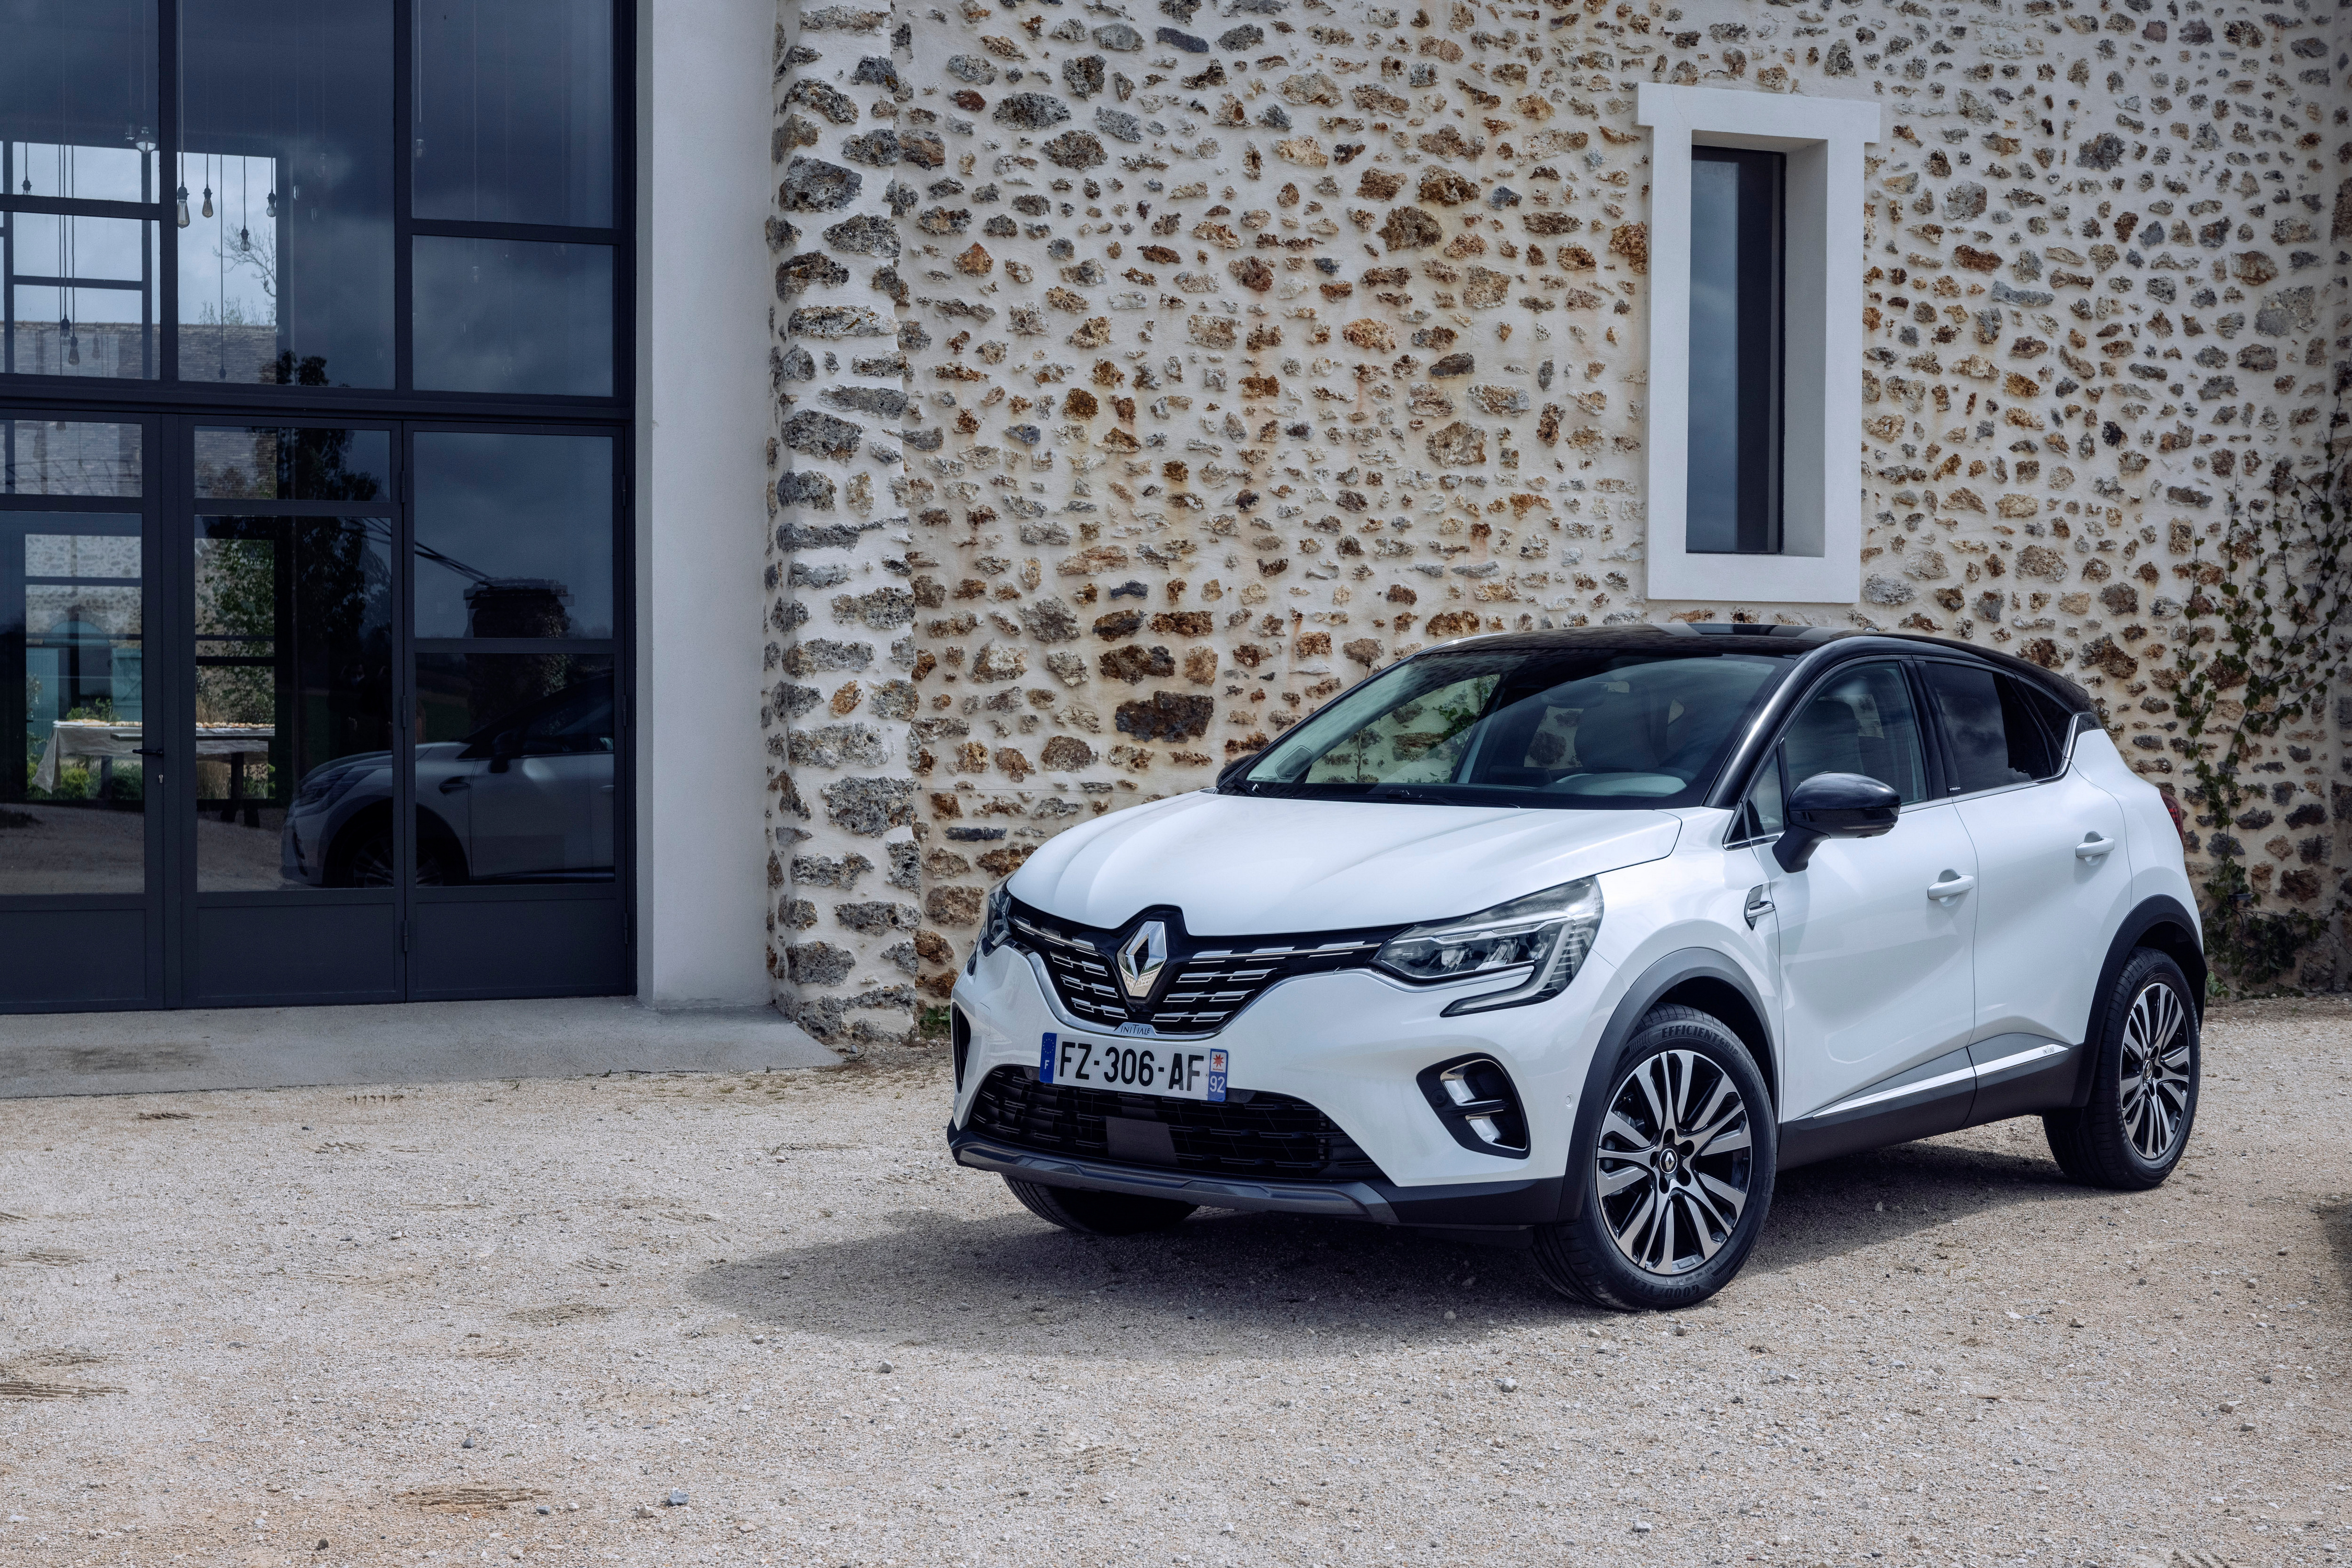 Wallpapers cars Renault crossover on the desktop